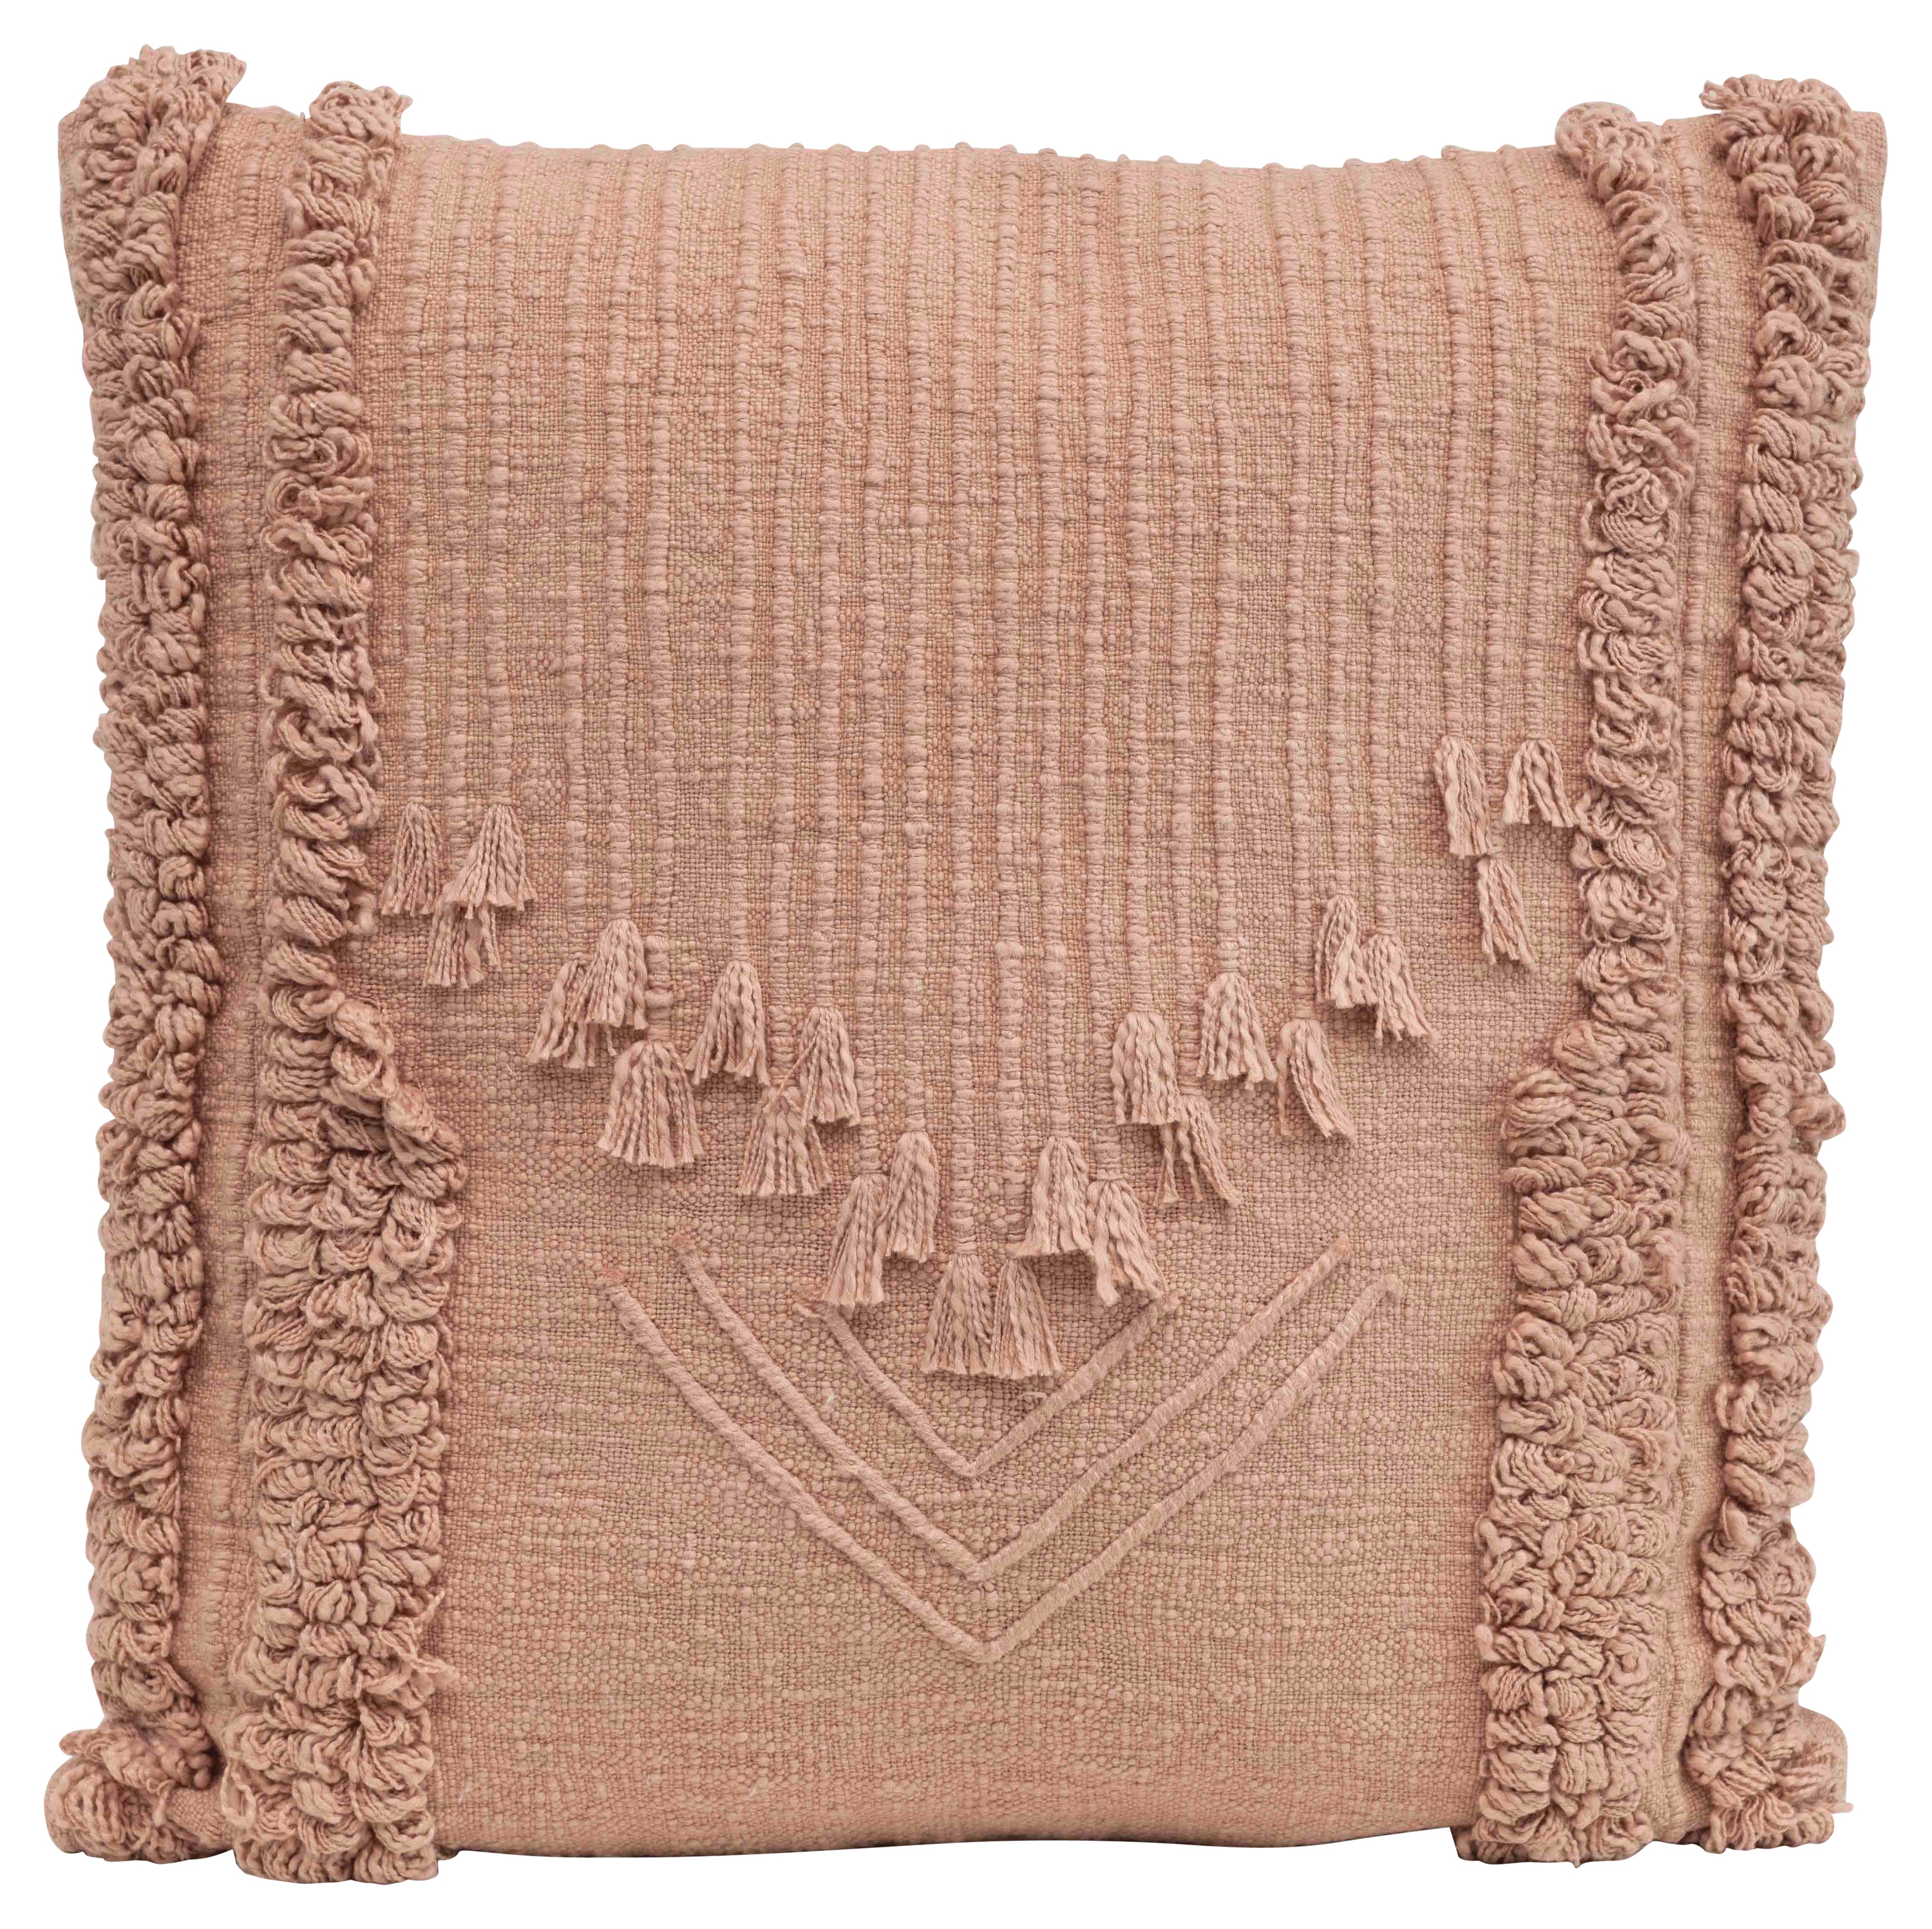 Square Cotton Embroidered Pillow with Looped Stripes & Decorative Front Tassels - Image 0